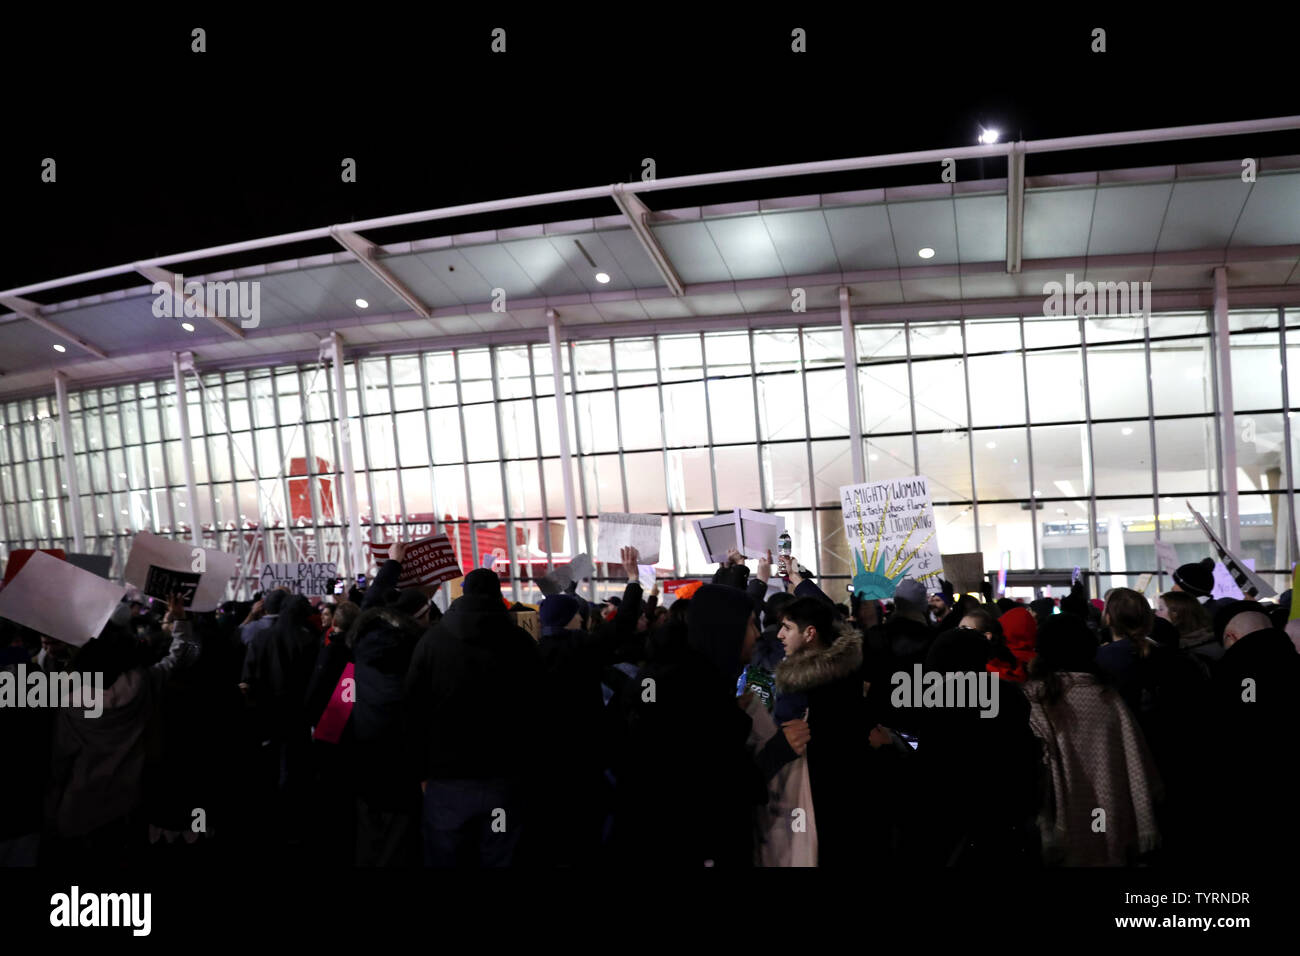 Protesters hold up signs protesting President Donald Trumps immigration policies at JFK Airport in New York City on January 28, 2017. President Trump signed a controversial executive order that halted refugees and residents from predominantly Muslim countries from entering the United States. People gathered at airports across the United States on Saturday to protest President Donald Trump's immigration policies.     Photo by John Angelillo/UPI Stock Photo